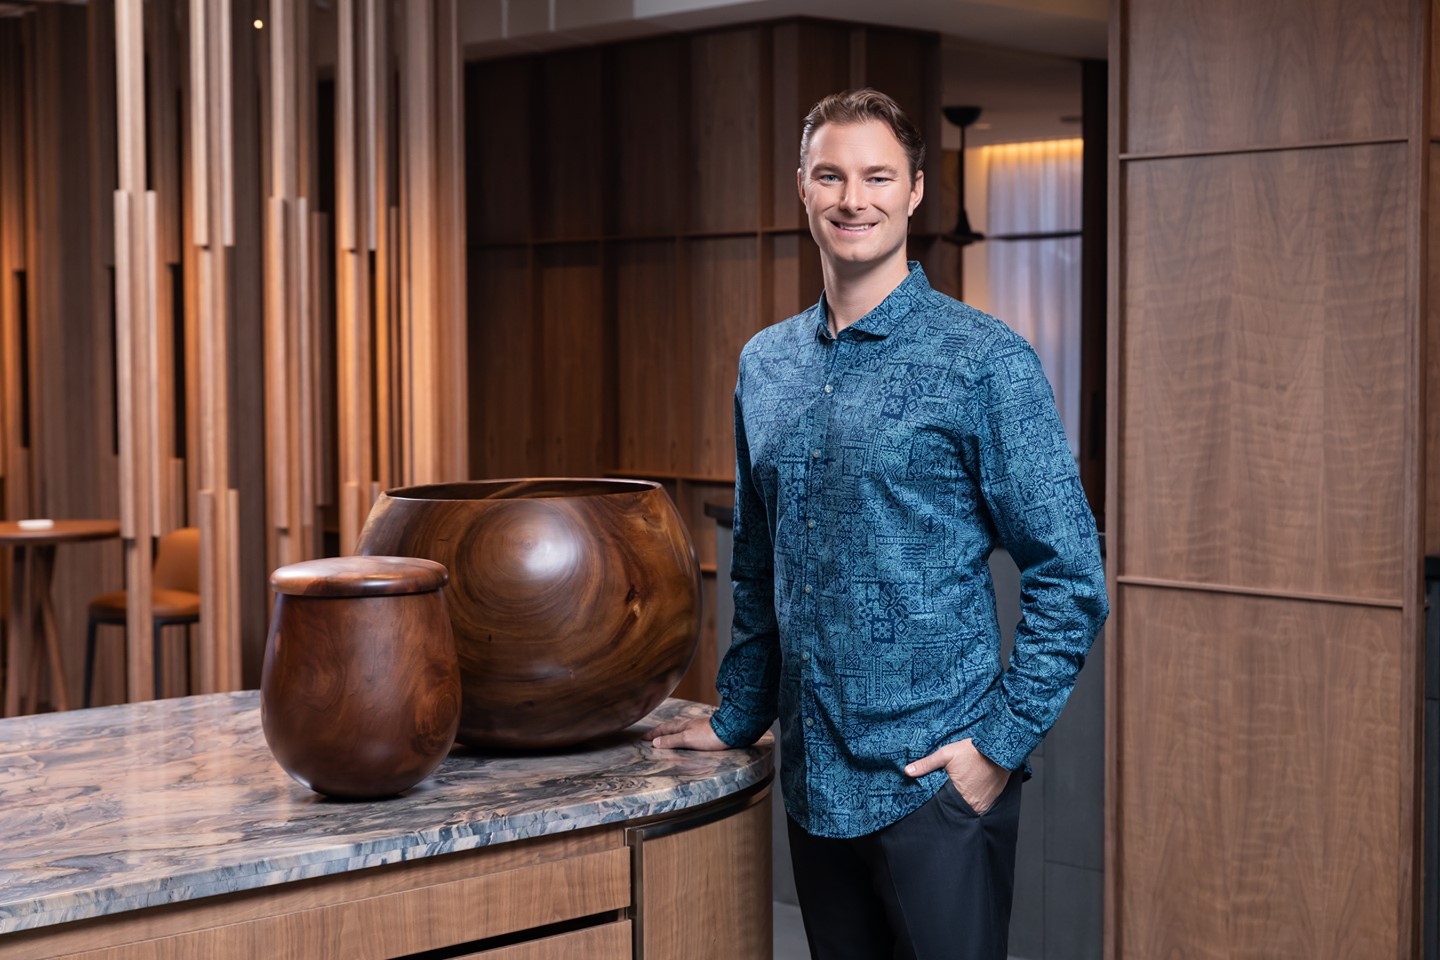 We’re proud to announce that Doug Johnstone, The Howard Hughes Corporation’s Hawaii President, was chosen as one of @HawaiiBusinessMagazine’s 20 For The Next 20! Mahalo to Doug and all of the other honorees for your positive effects on our island home. Visit the link in our bio to read the article.